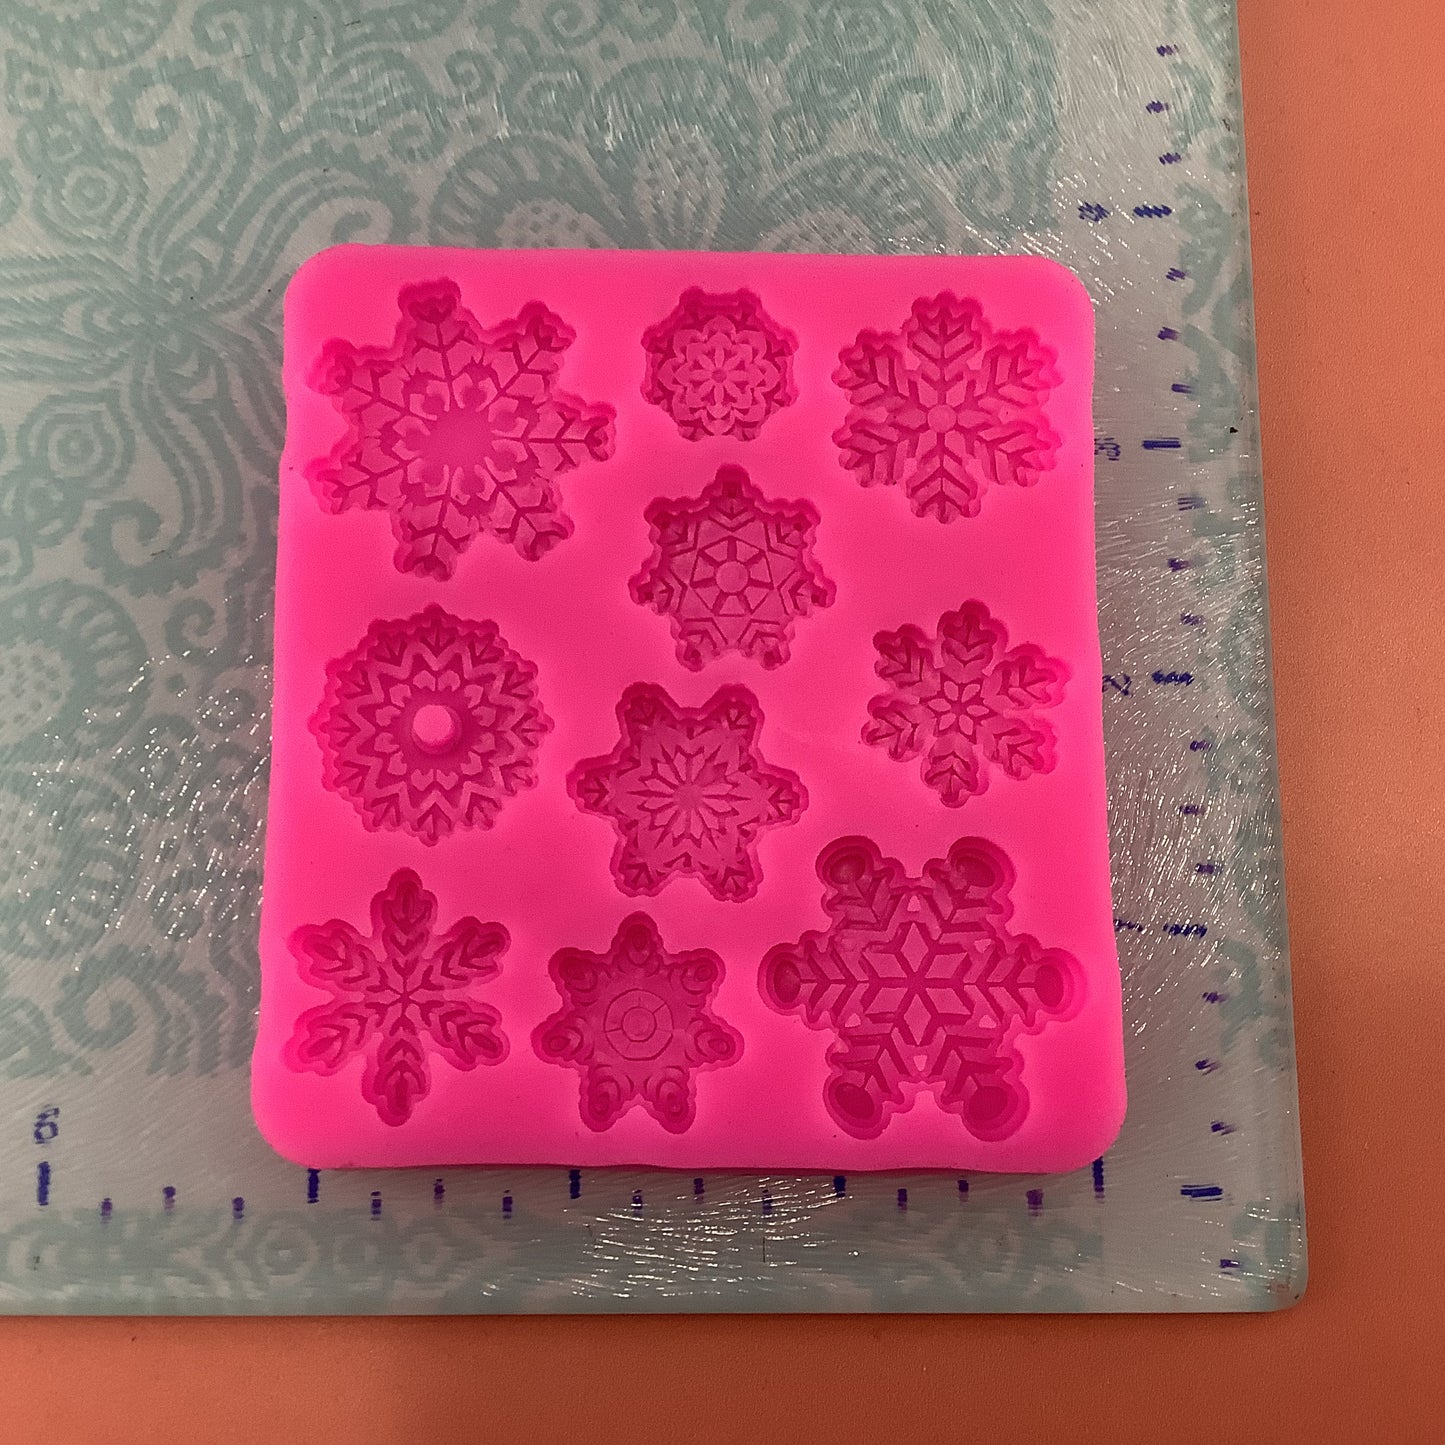 Snowflakes Silicone Mold for clay